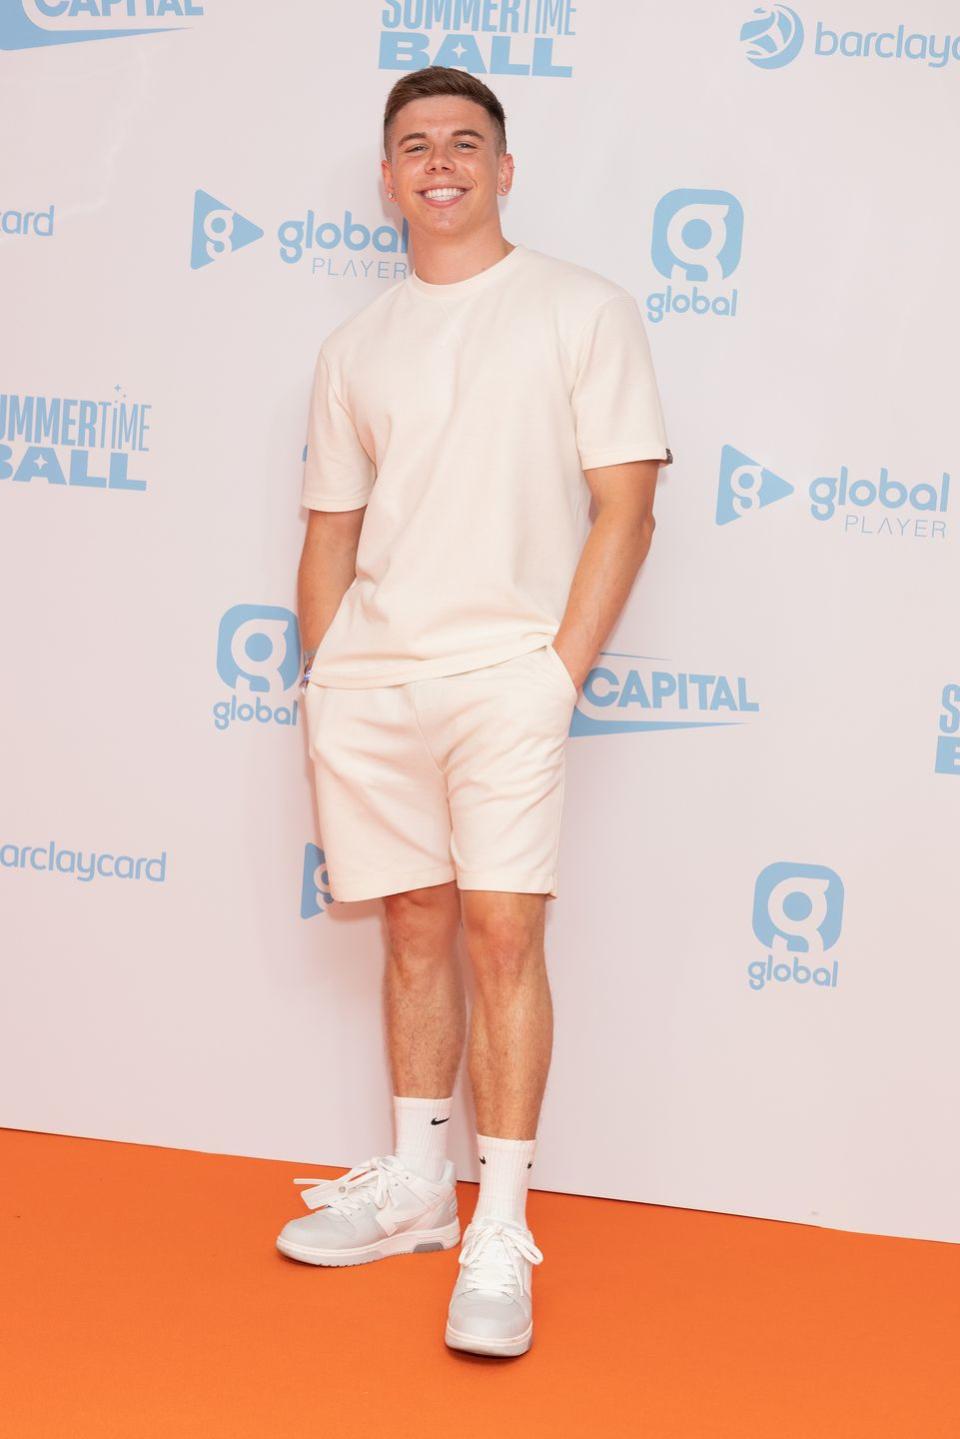 london, england june 11 george baggs attends the capital summertime ball 2023 at wembley stadium on june 11, 2023 in london, england photo by jo haleredferns